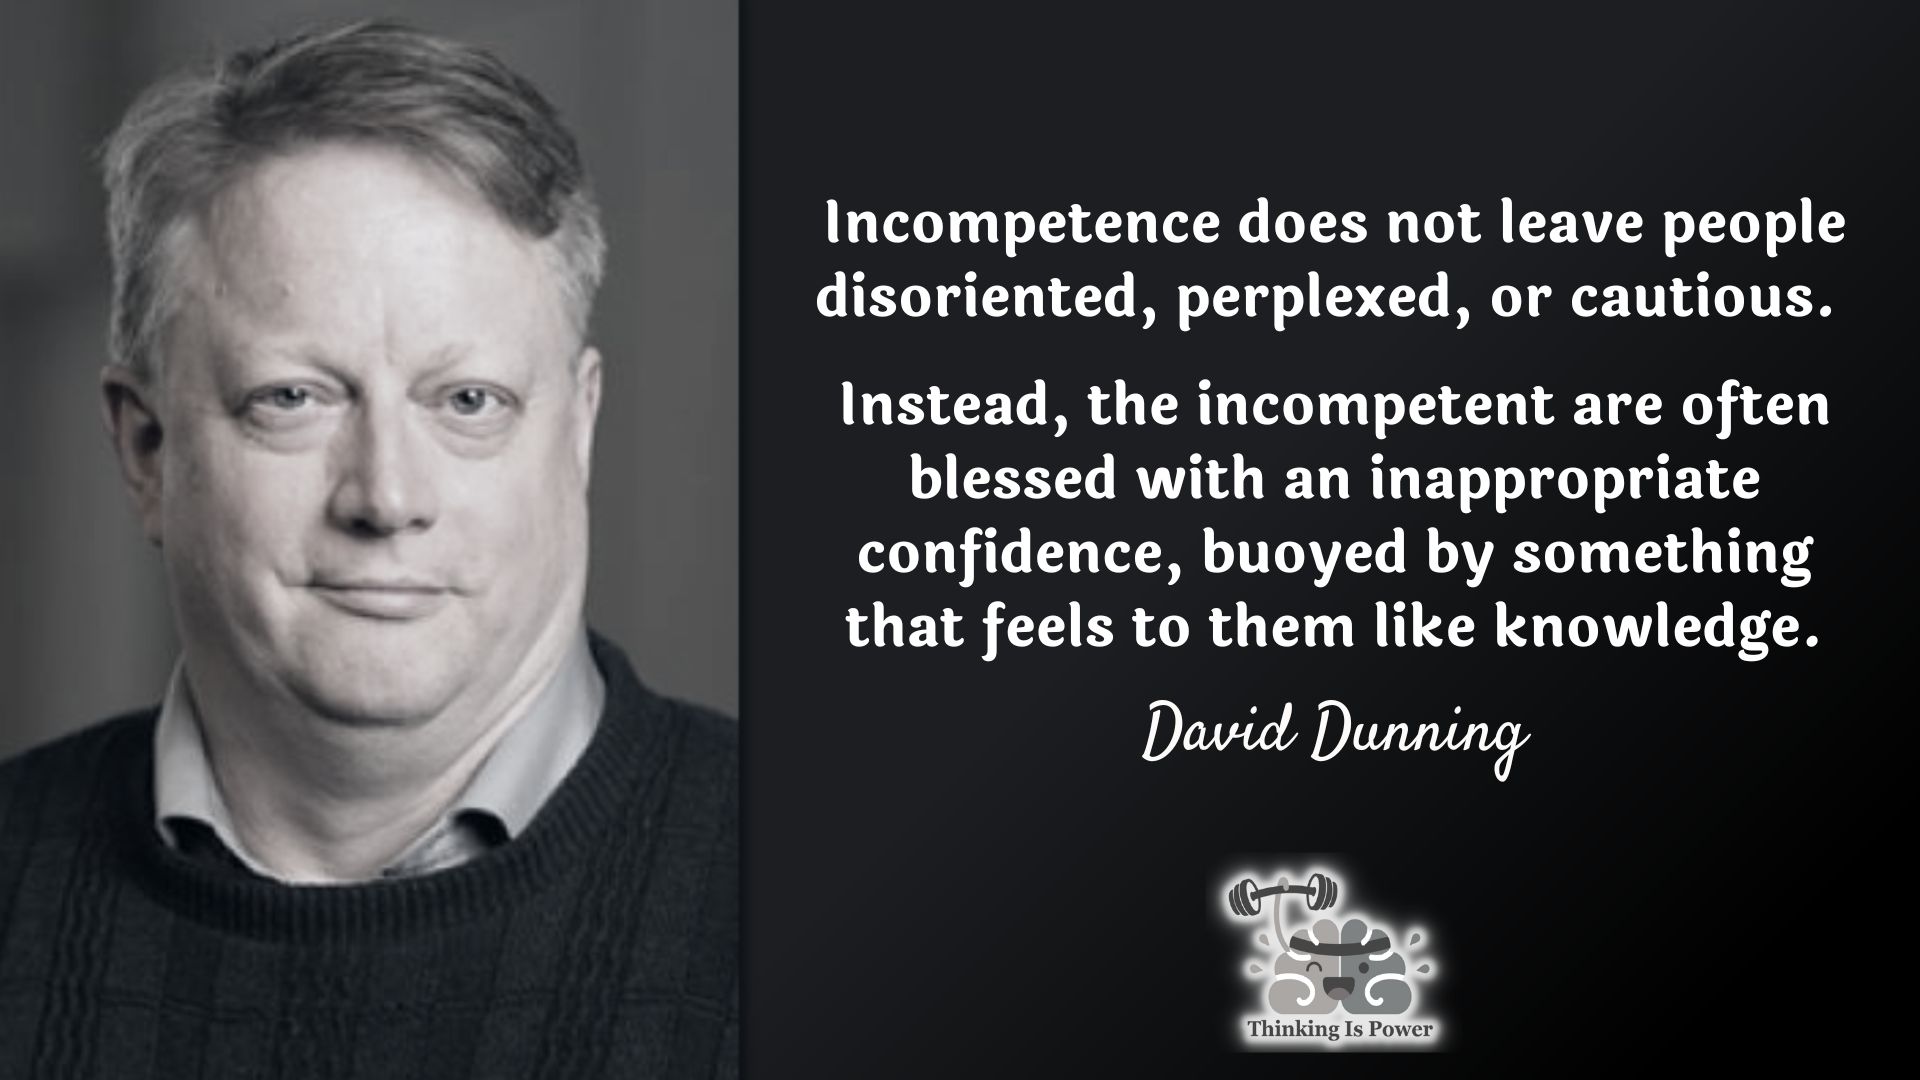 David Dunning Quote Dunning Kruger Effect: Incompetence does not leave people disoriented, perplexed, or cautious. Instead, the incompetent are often blessed with an inappropriate confidence, buoyed by something that feels to them like knowledge.